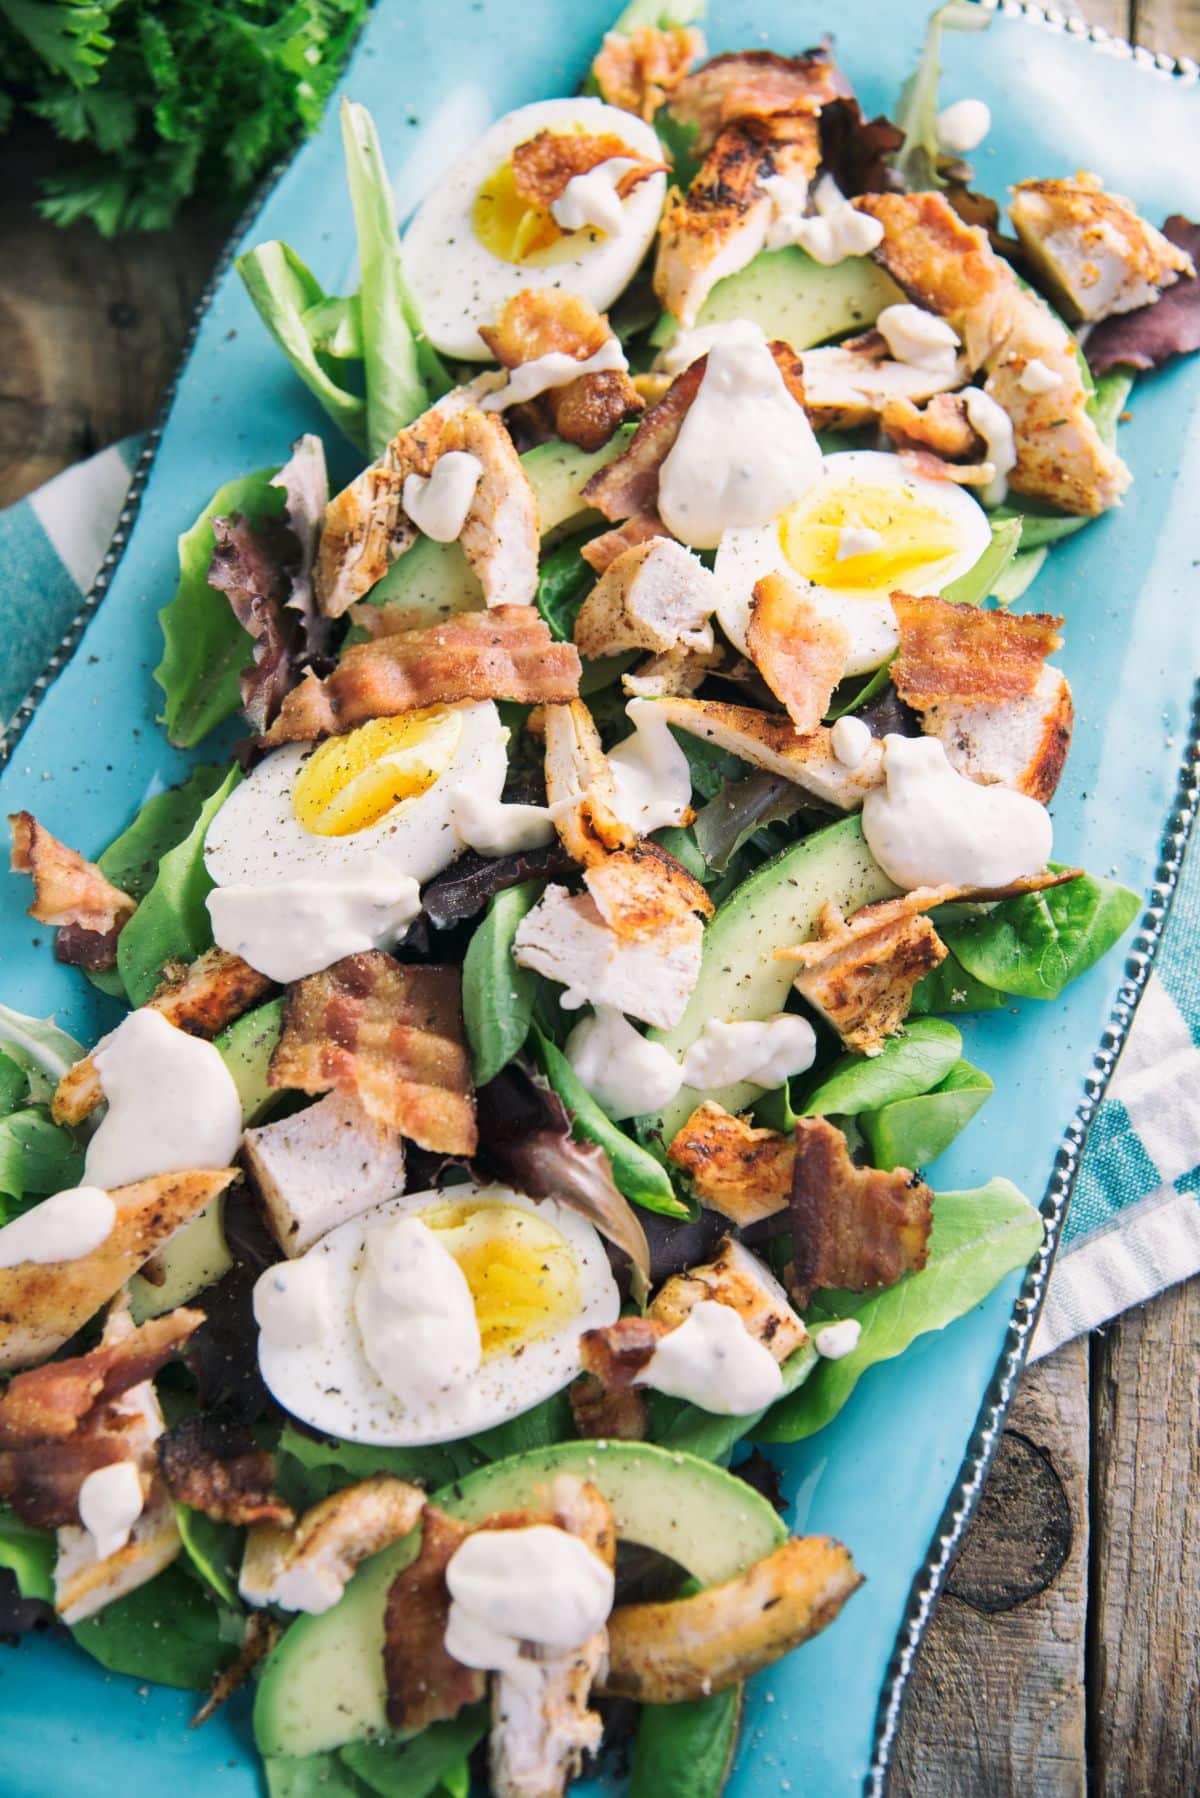 Keto Chicken and Bacon Loaded Salad on a blue tray.